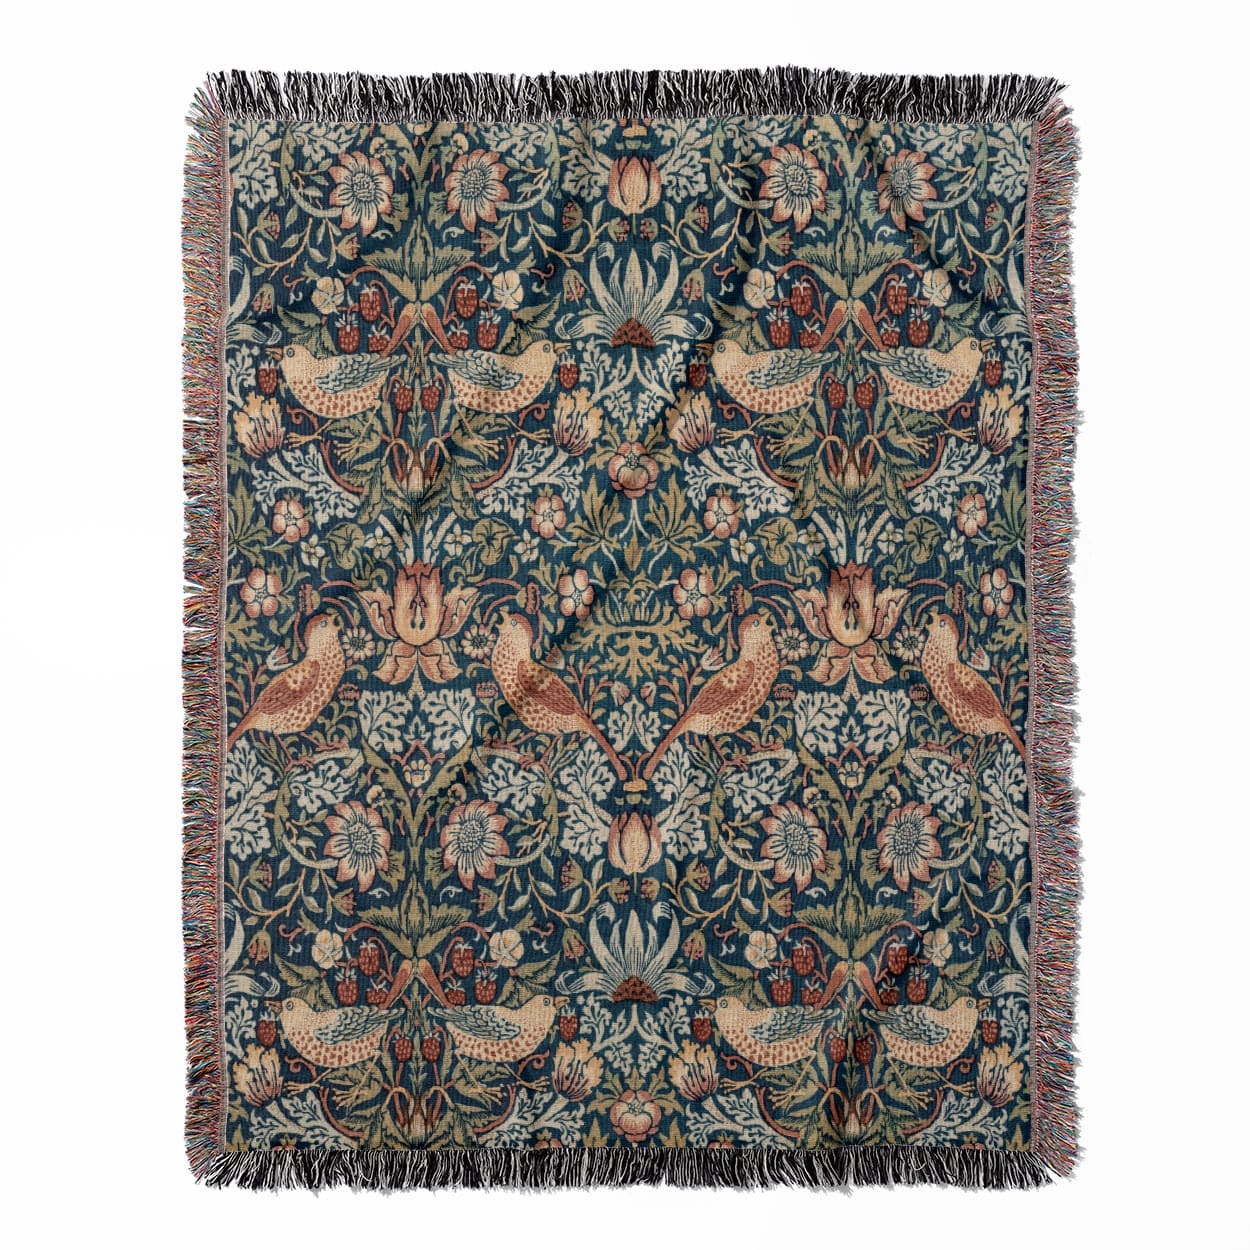 Birds and Plants woven throw blanket, made of 100% cotton, featuring a soft and cozy texture with a William Morris design for home decor.